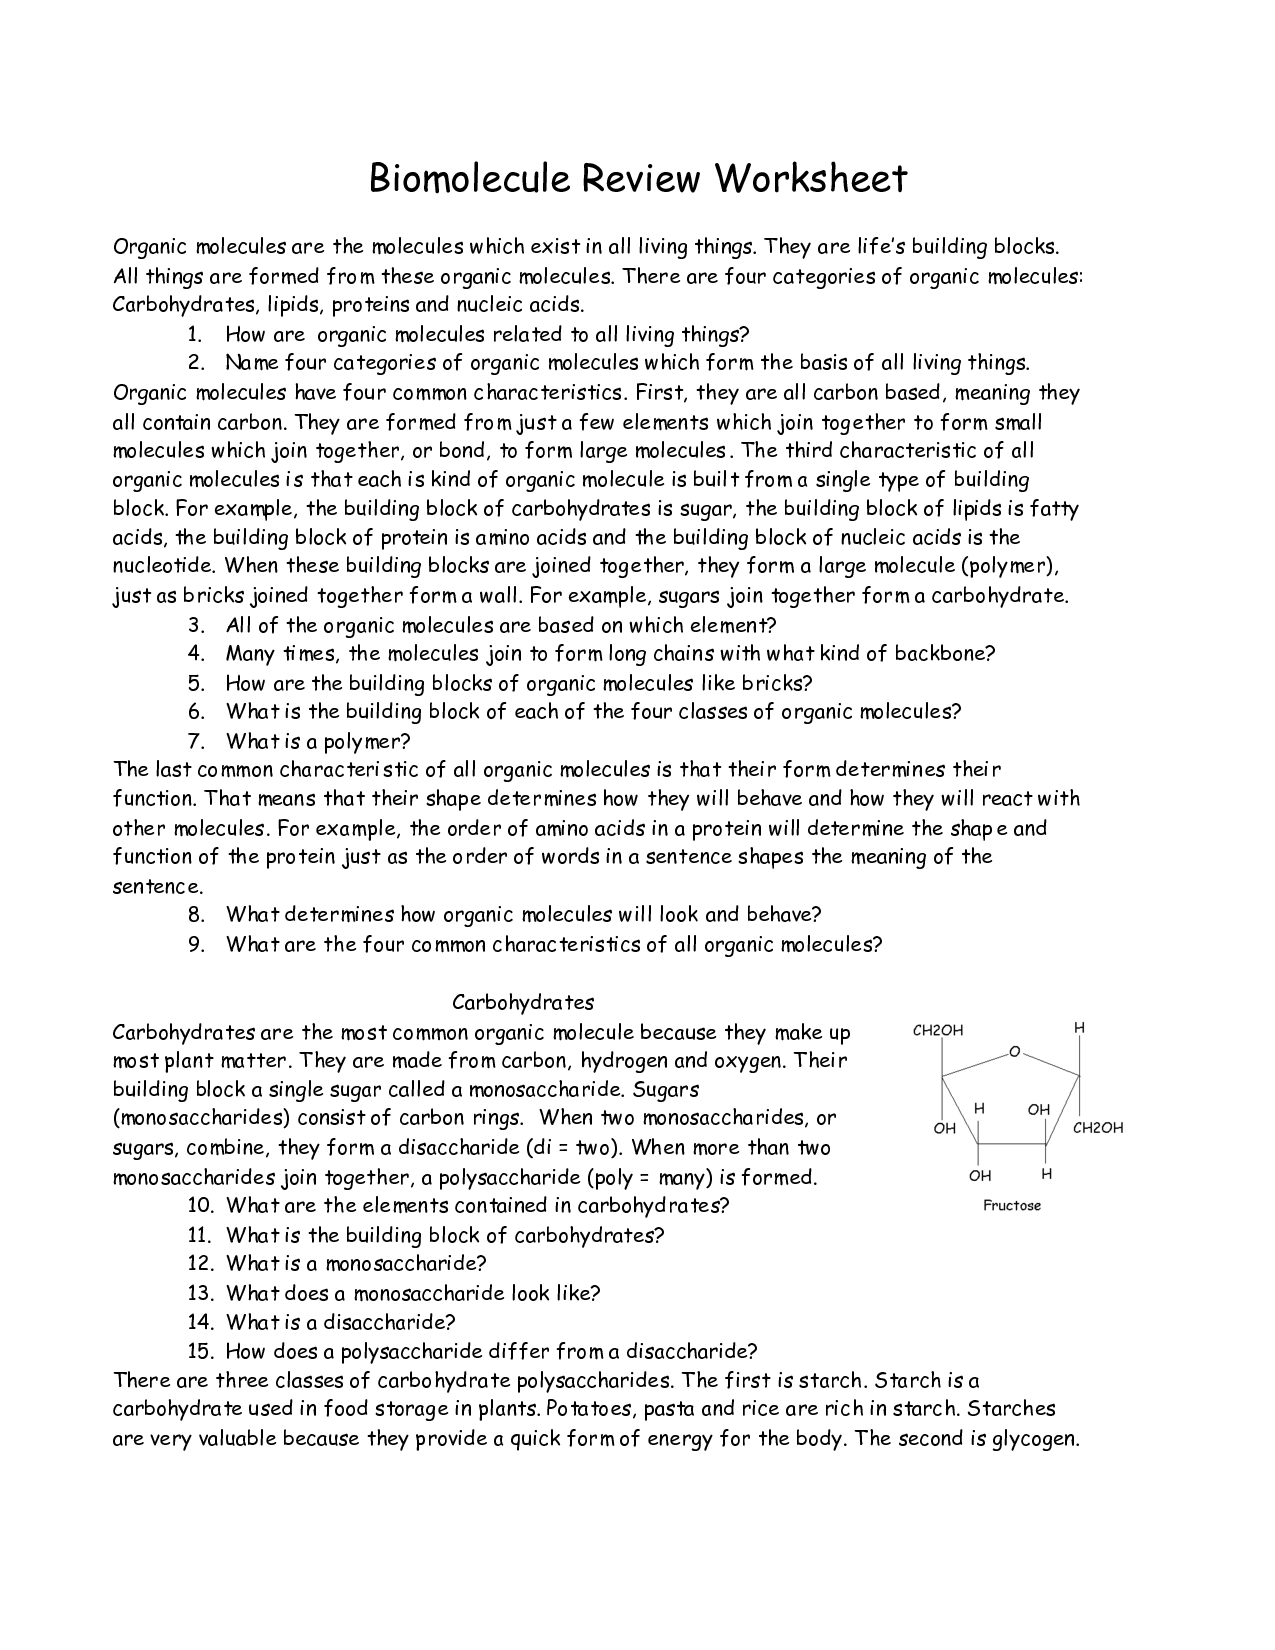 14 Best Images Of Biological Molecules Worksheet Answers Organic Molecules Worksheet Review 